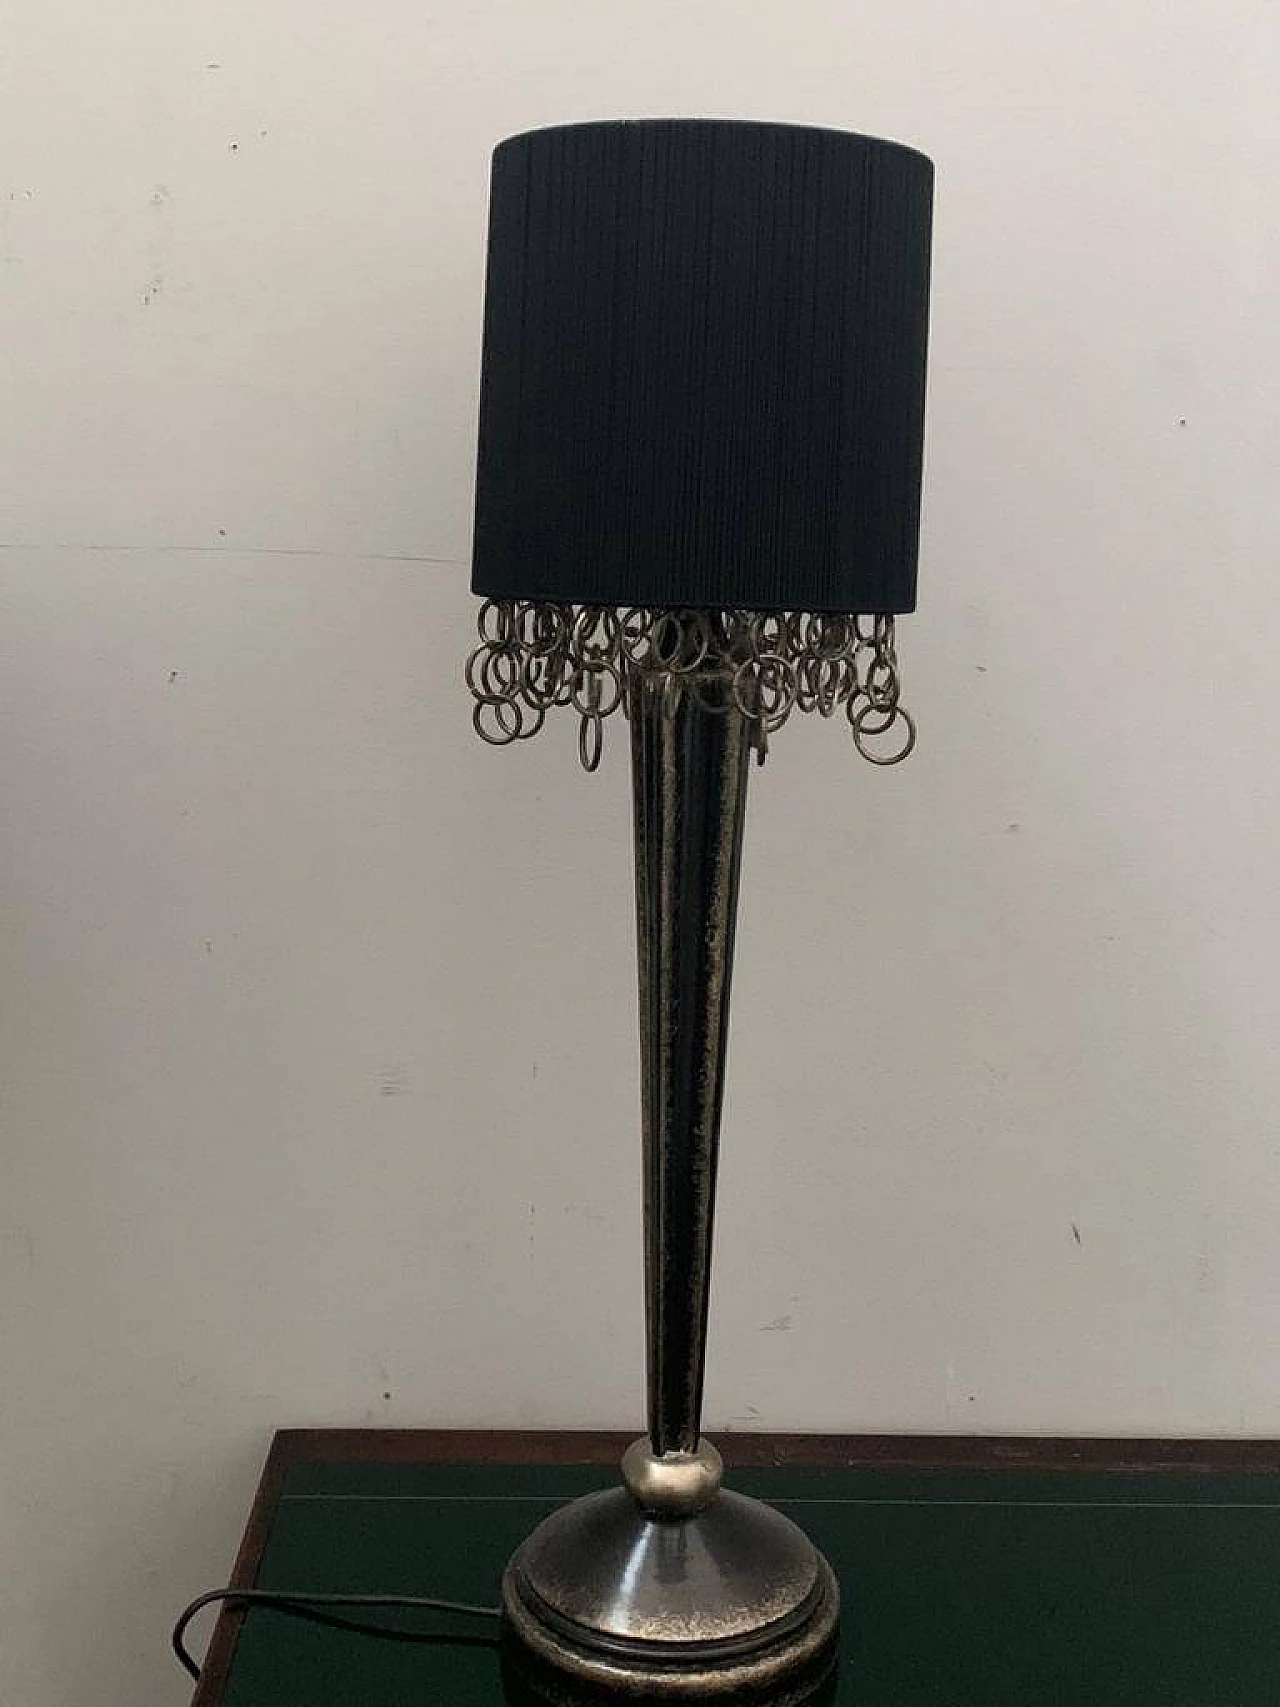 Art Deco Style Table Lamp by Leeazanne for Lam Lee Group Dallas, 1990s 1198991